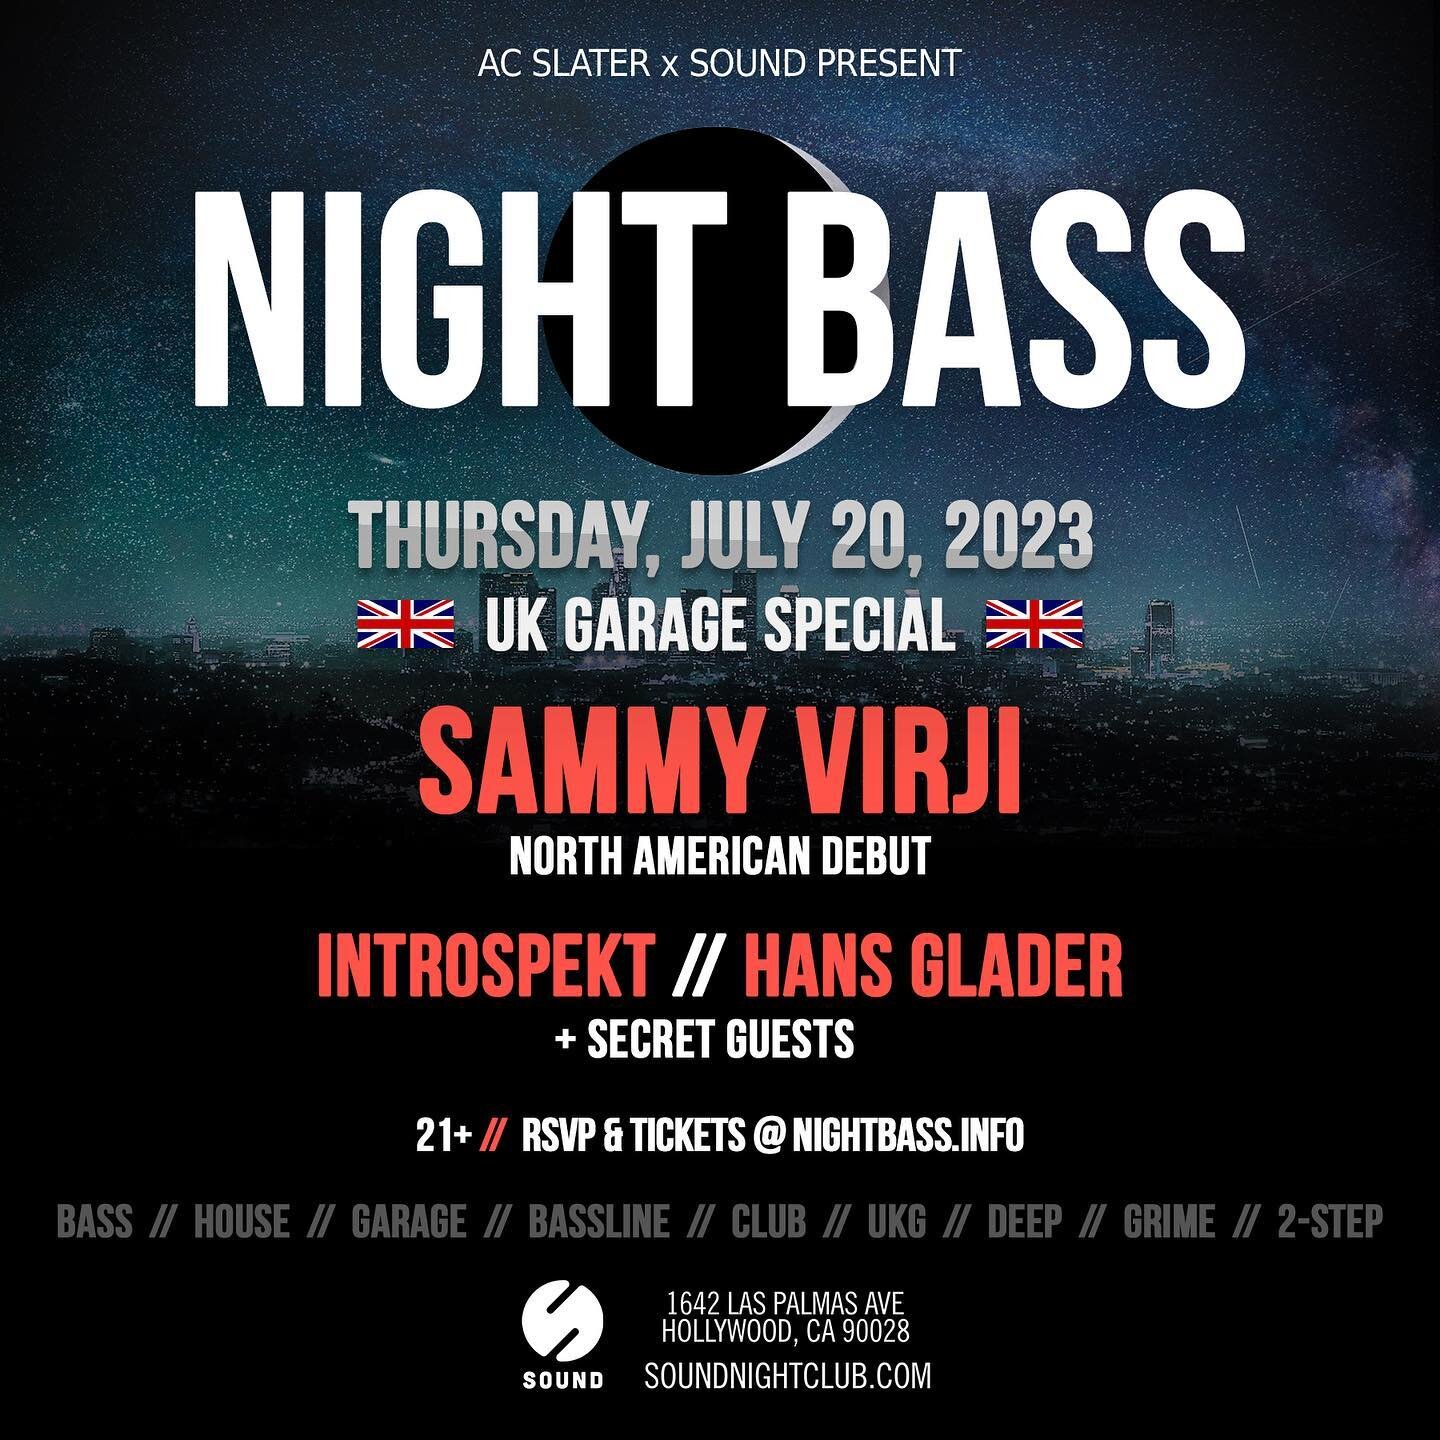 Stoked to announce the Night Bass UK Garage Special! 🇬🇧 Coming to Sound on July 20. 

For this UK Garage takeover, we&rsquo;re bringing out the don @sammyvirji for his North American show debut. 

Alongside him we have @sage_introspekt, who is know